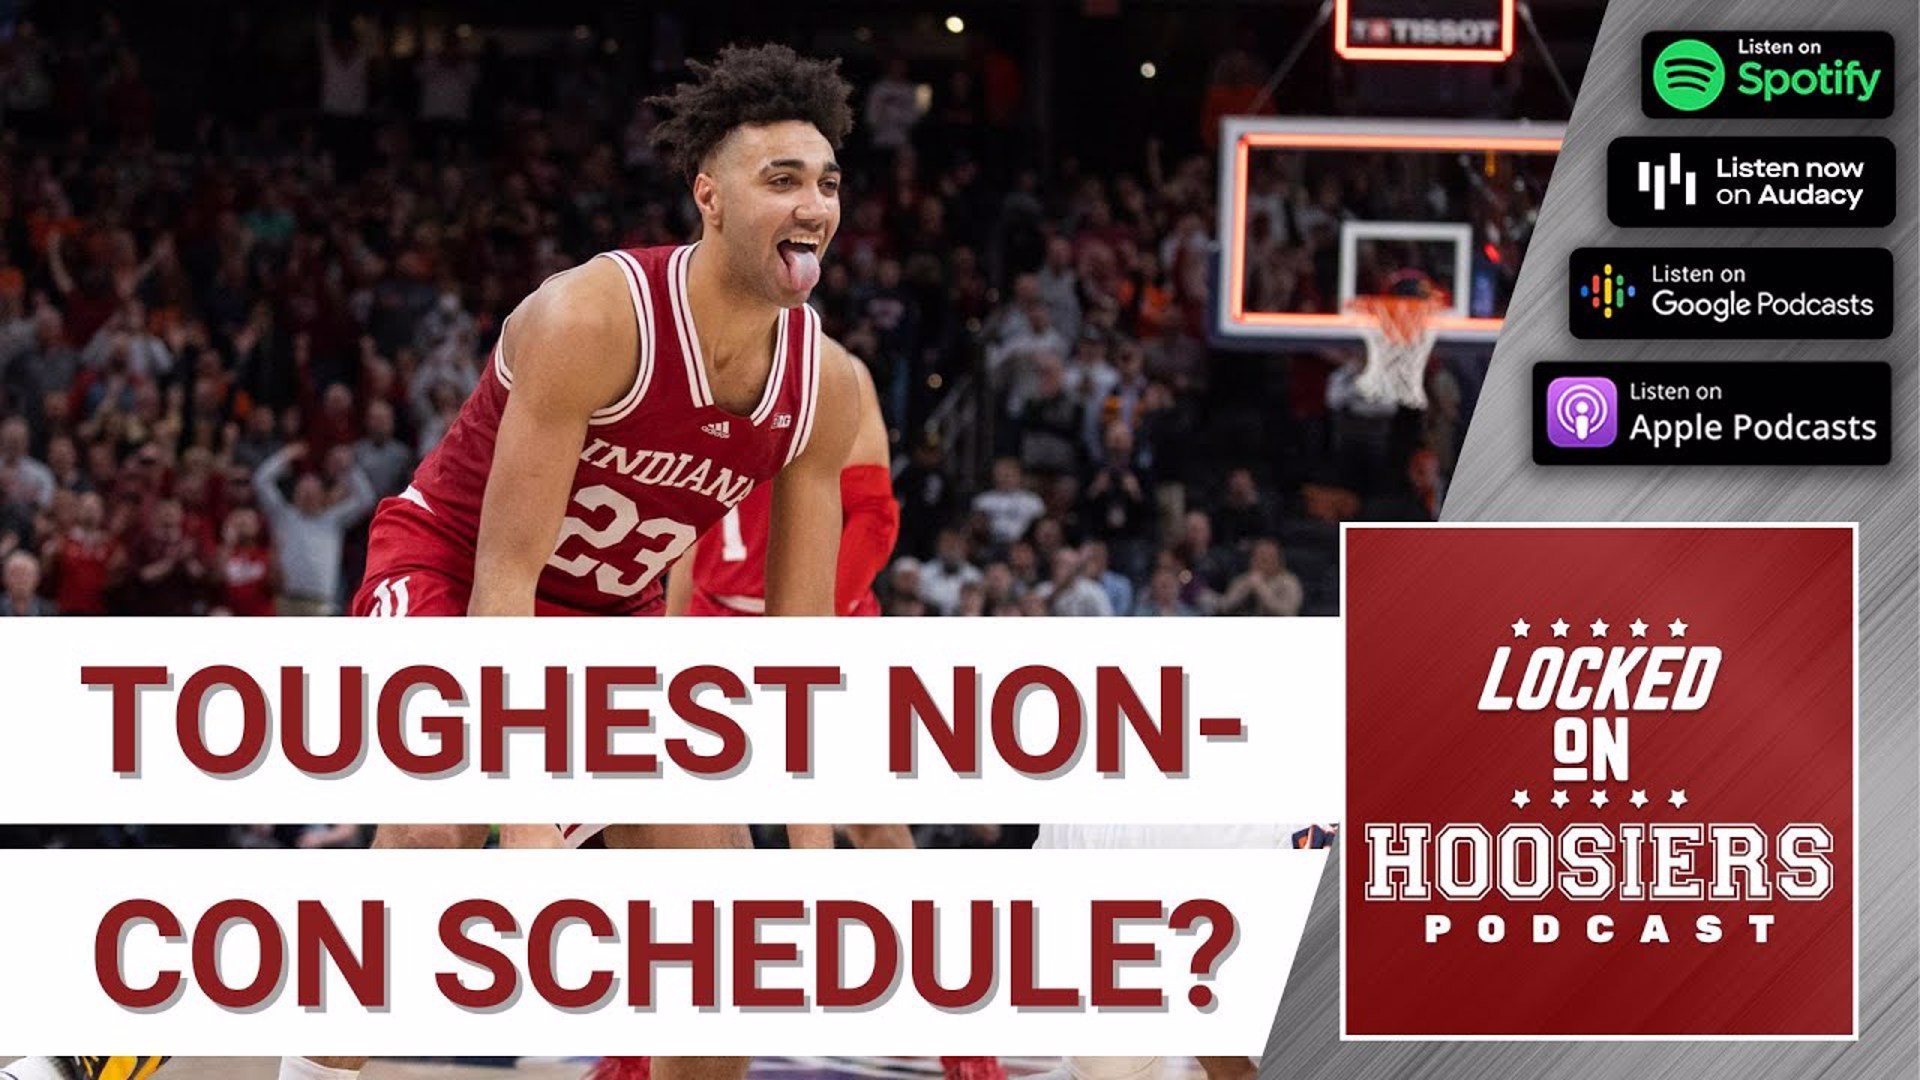 Does IU have the toughest non-conference schedule in the country? | Indiana University podcast